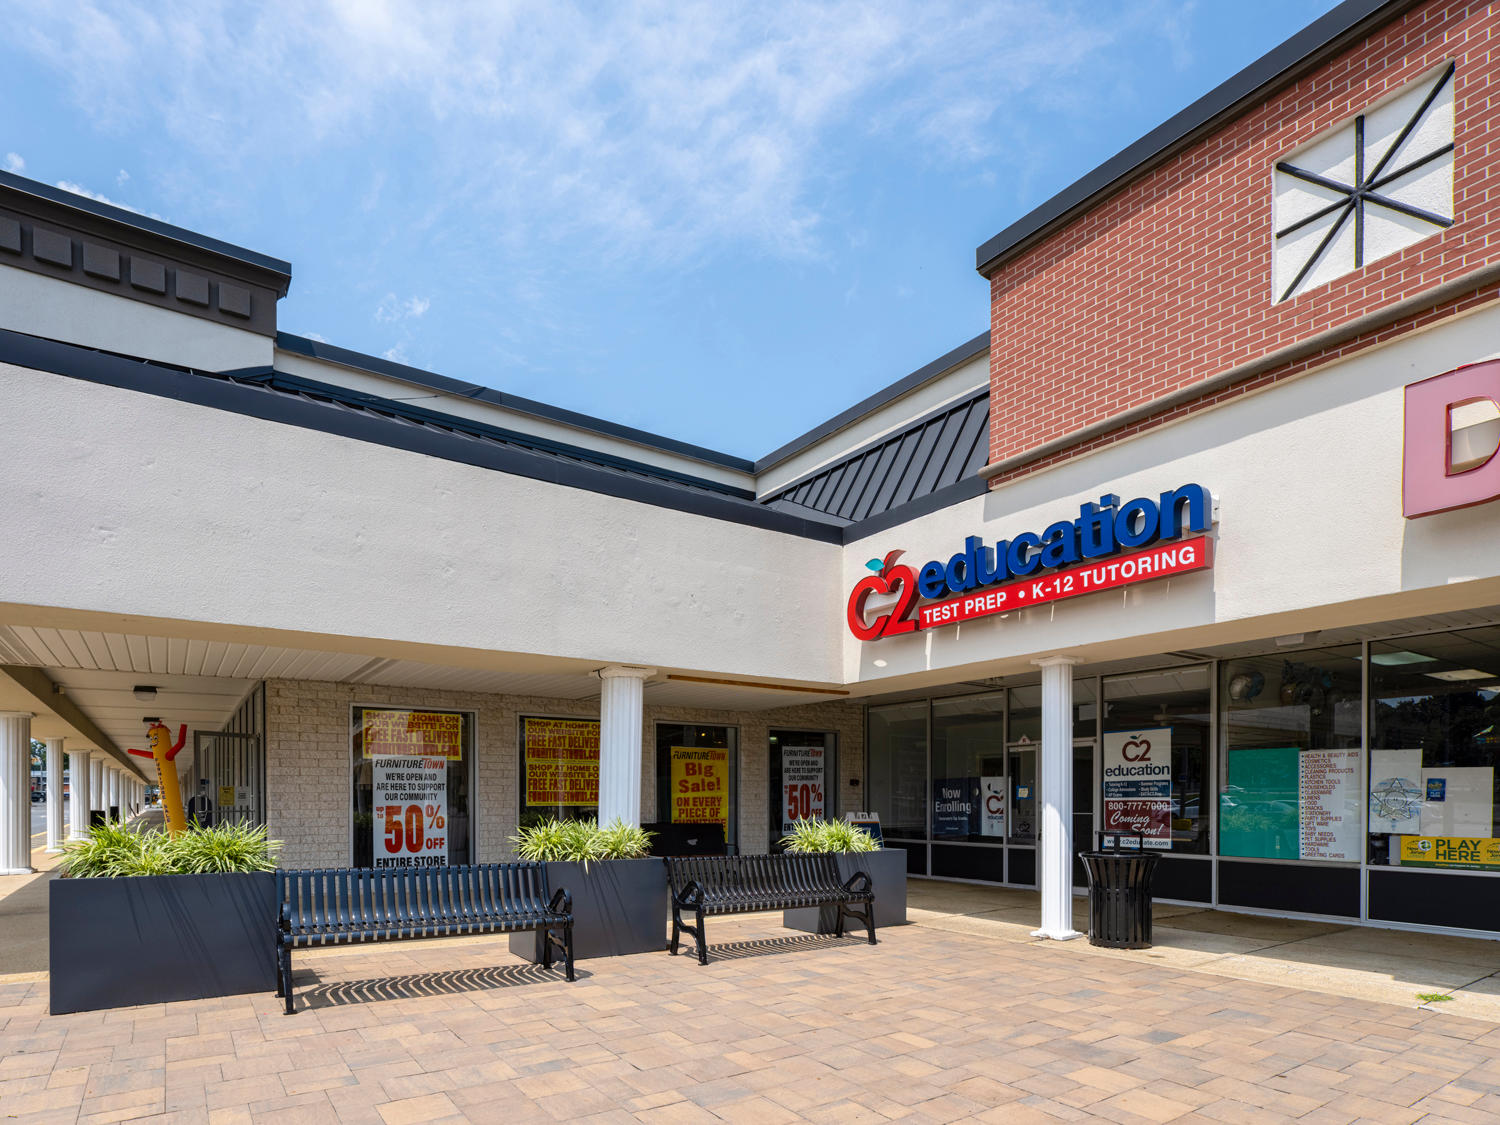 C2 Education at Middletown Plaza Shopping Center